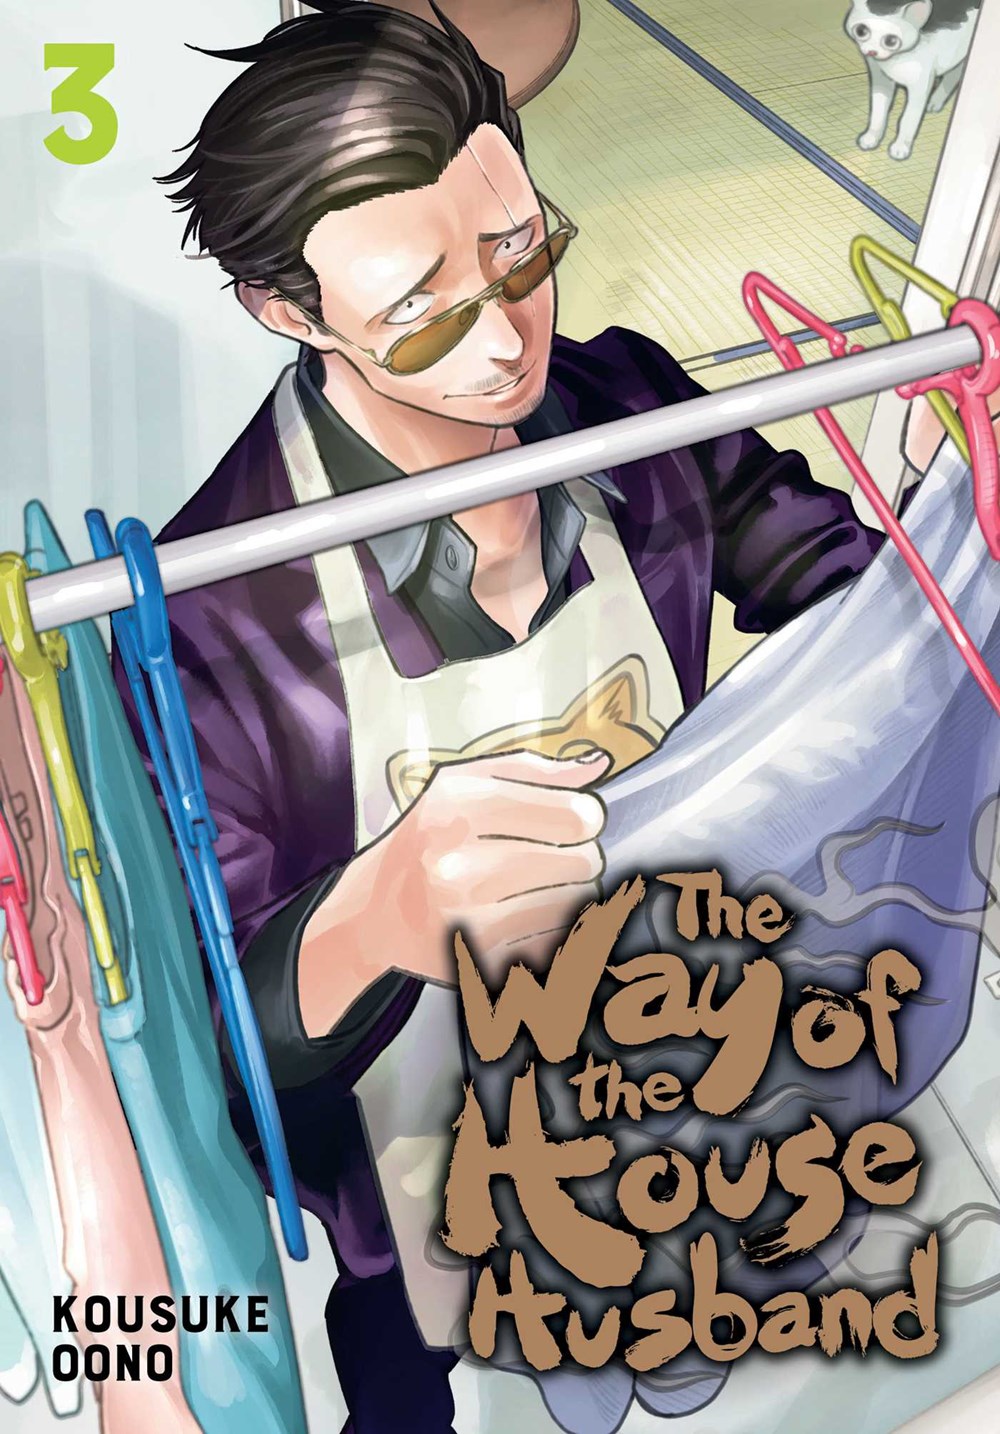 The Way of the Househusband  Vol. 3: Volume 3